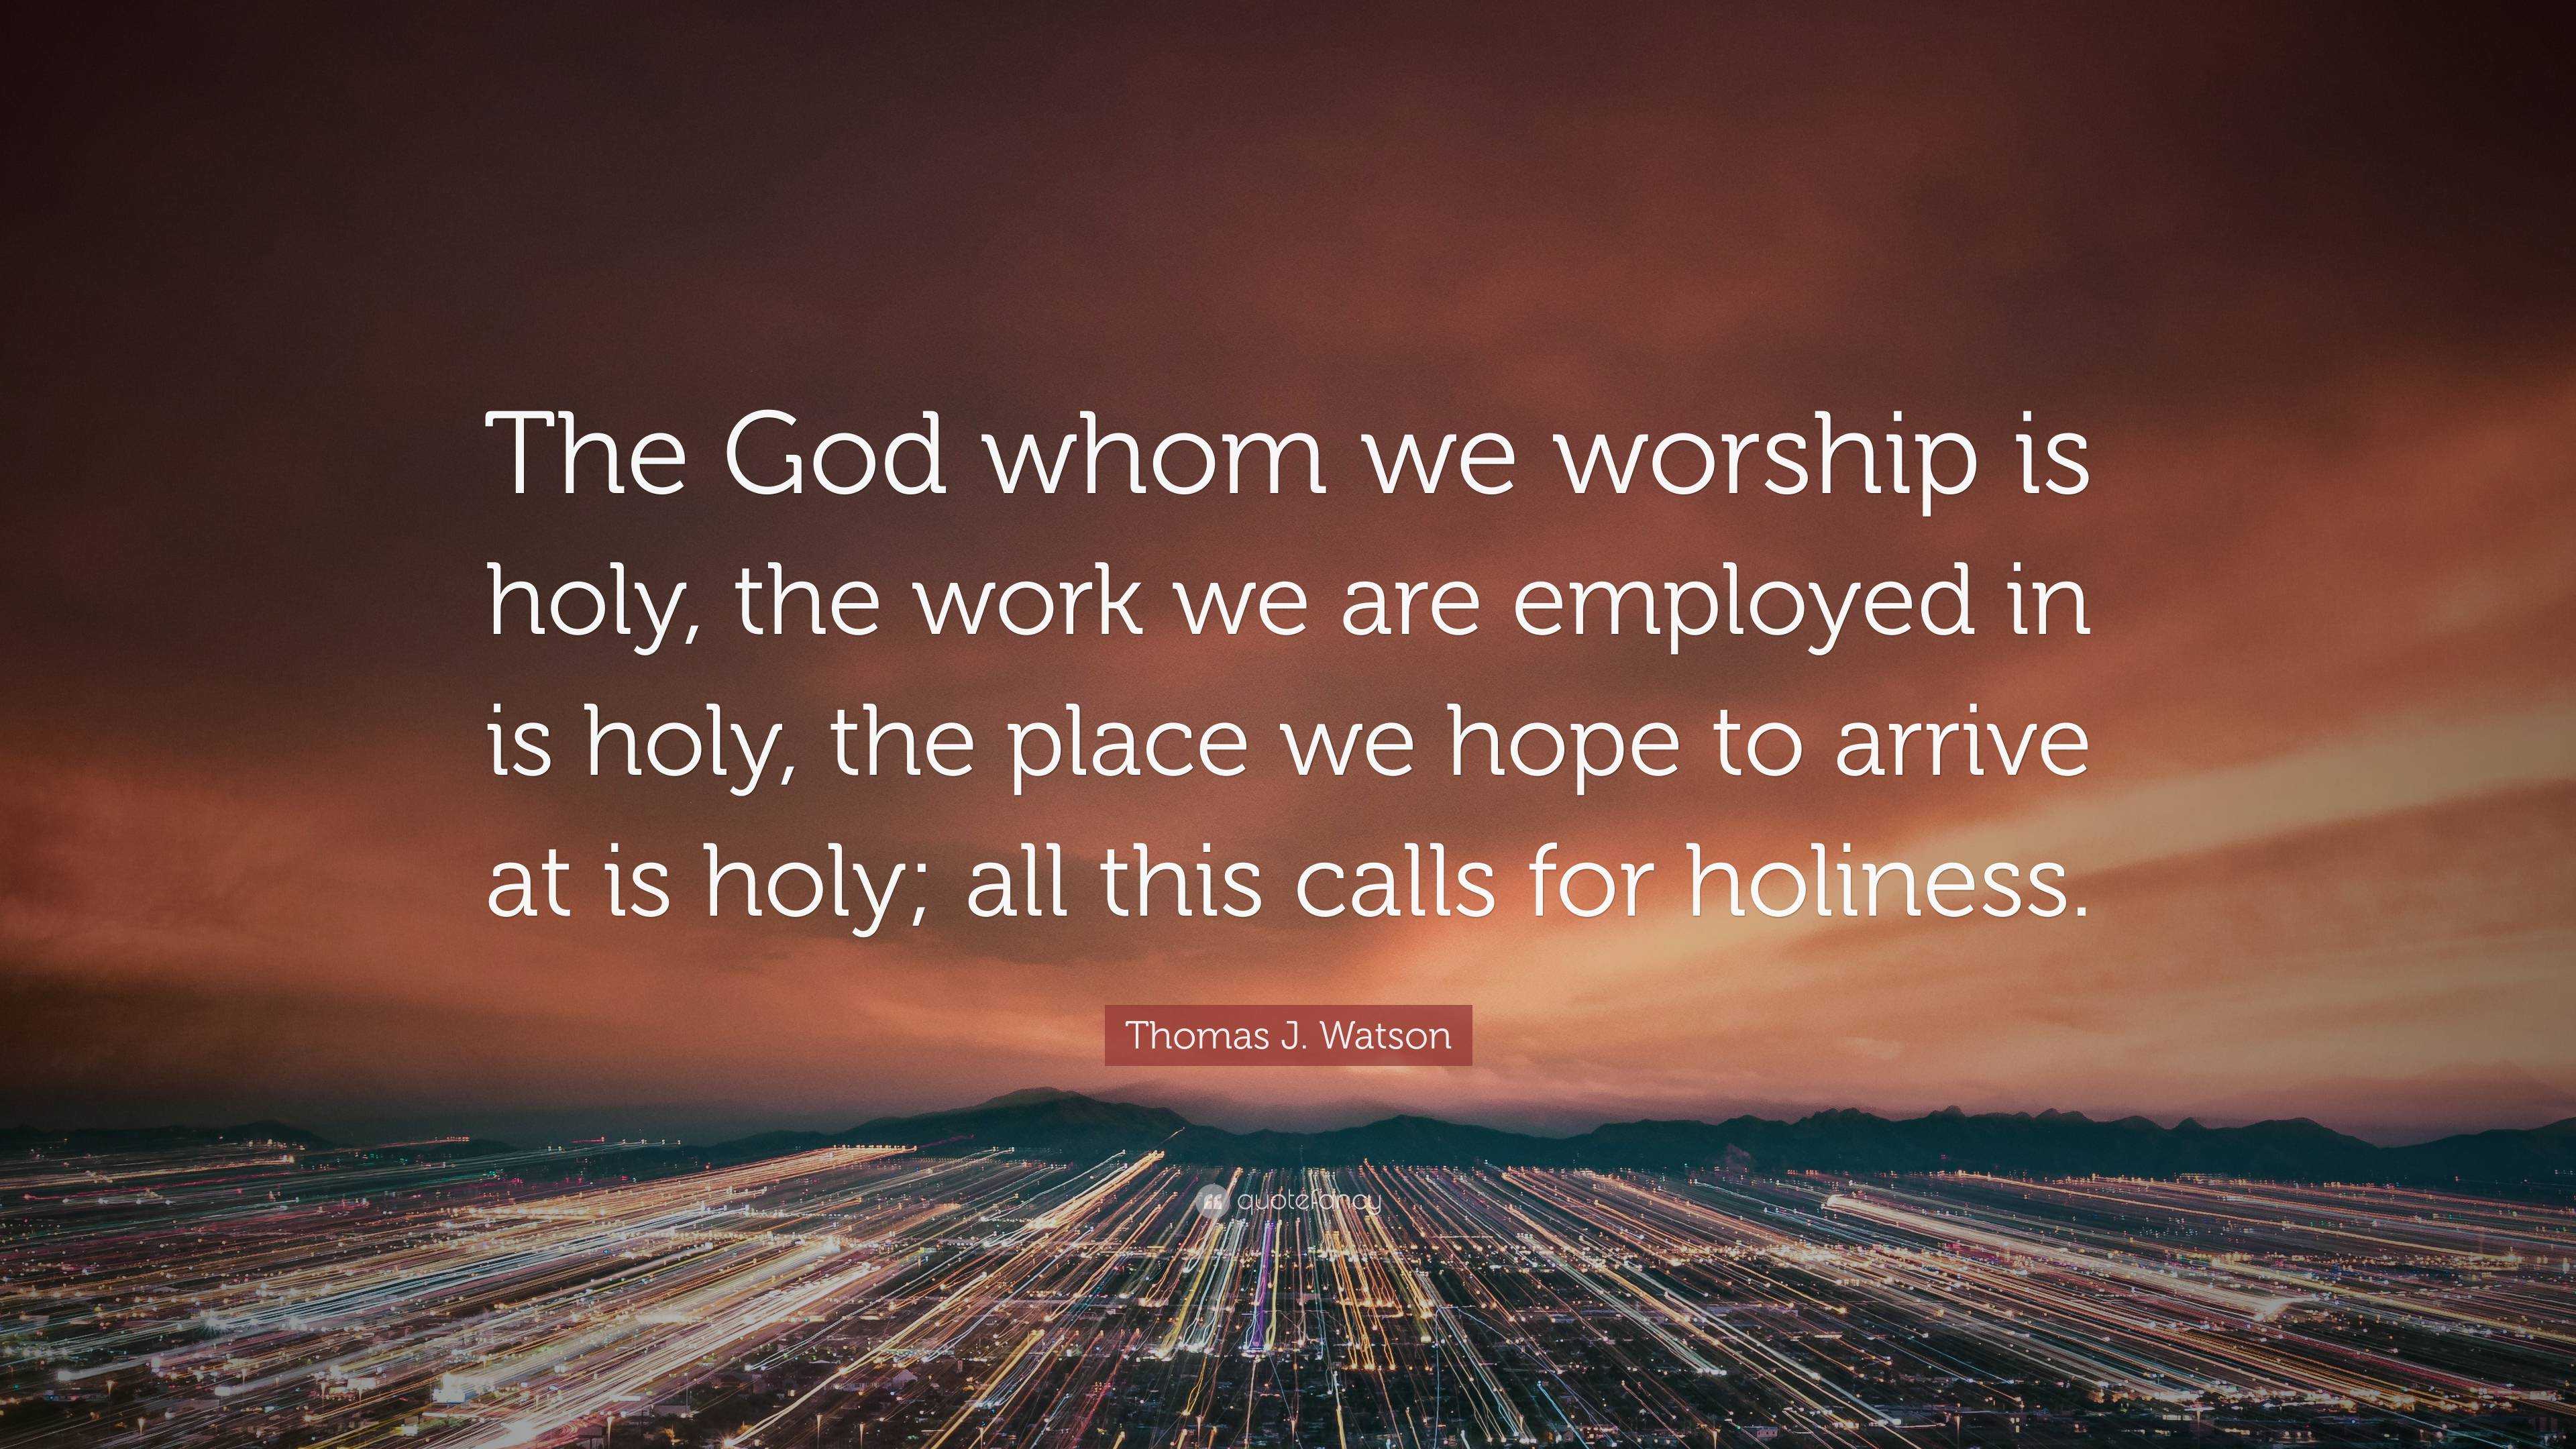 Thomas J. Watson Quote: “The God whom we worship is holy, the work we are  employed in is holy, the place we hope to arrive at is holy; all this c...”